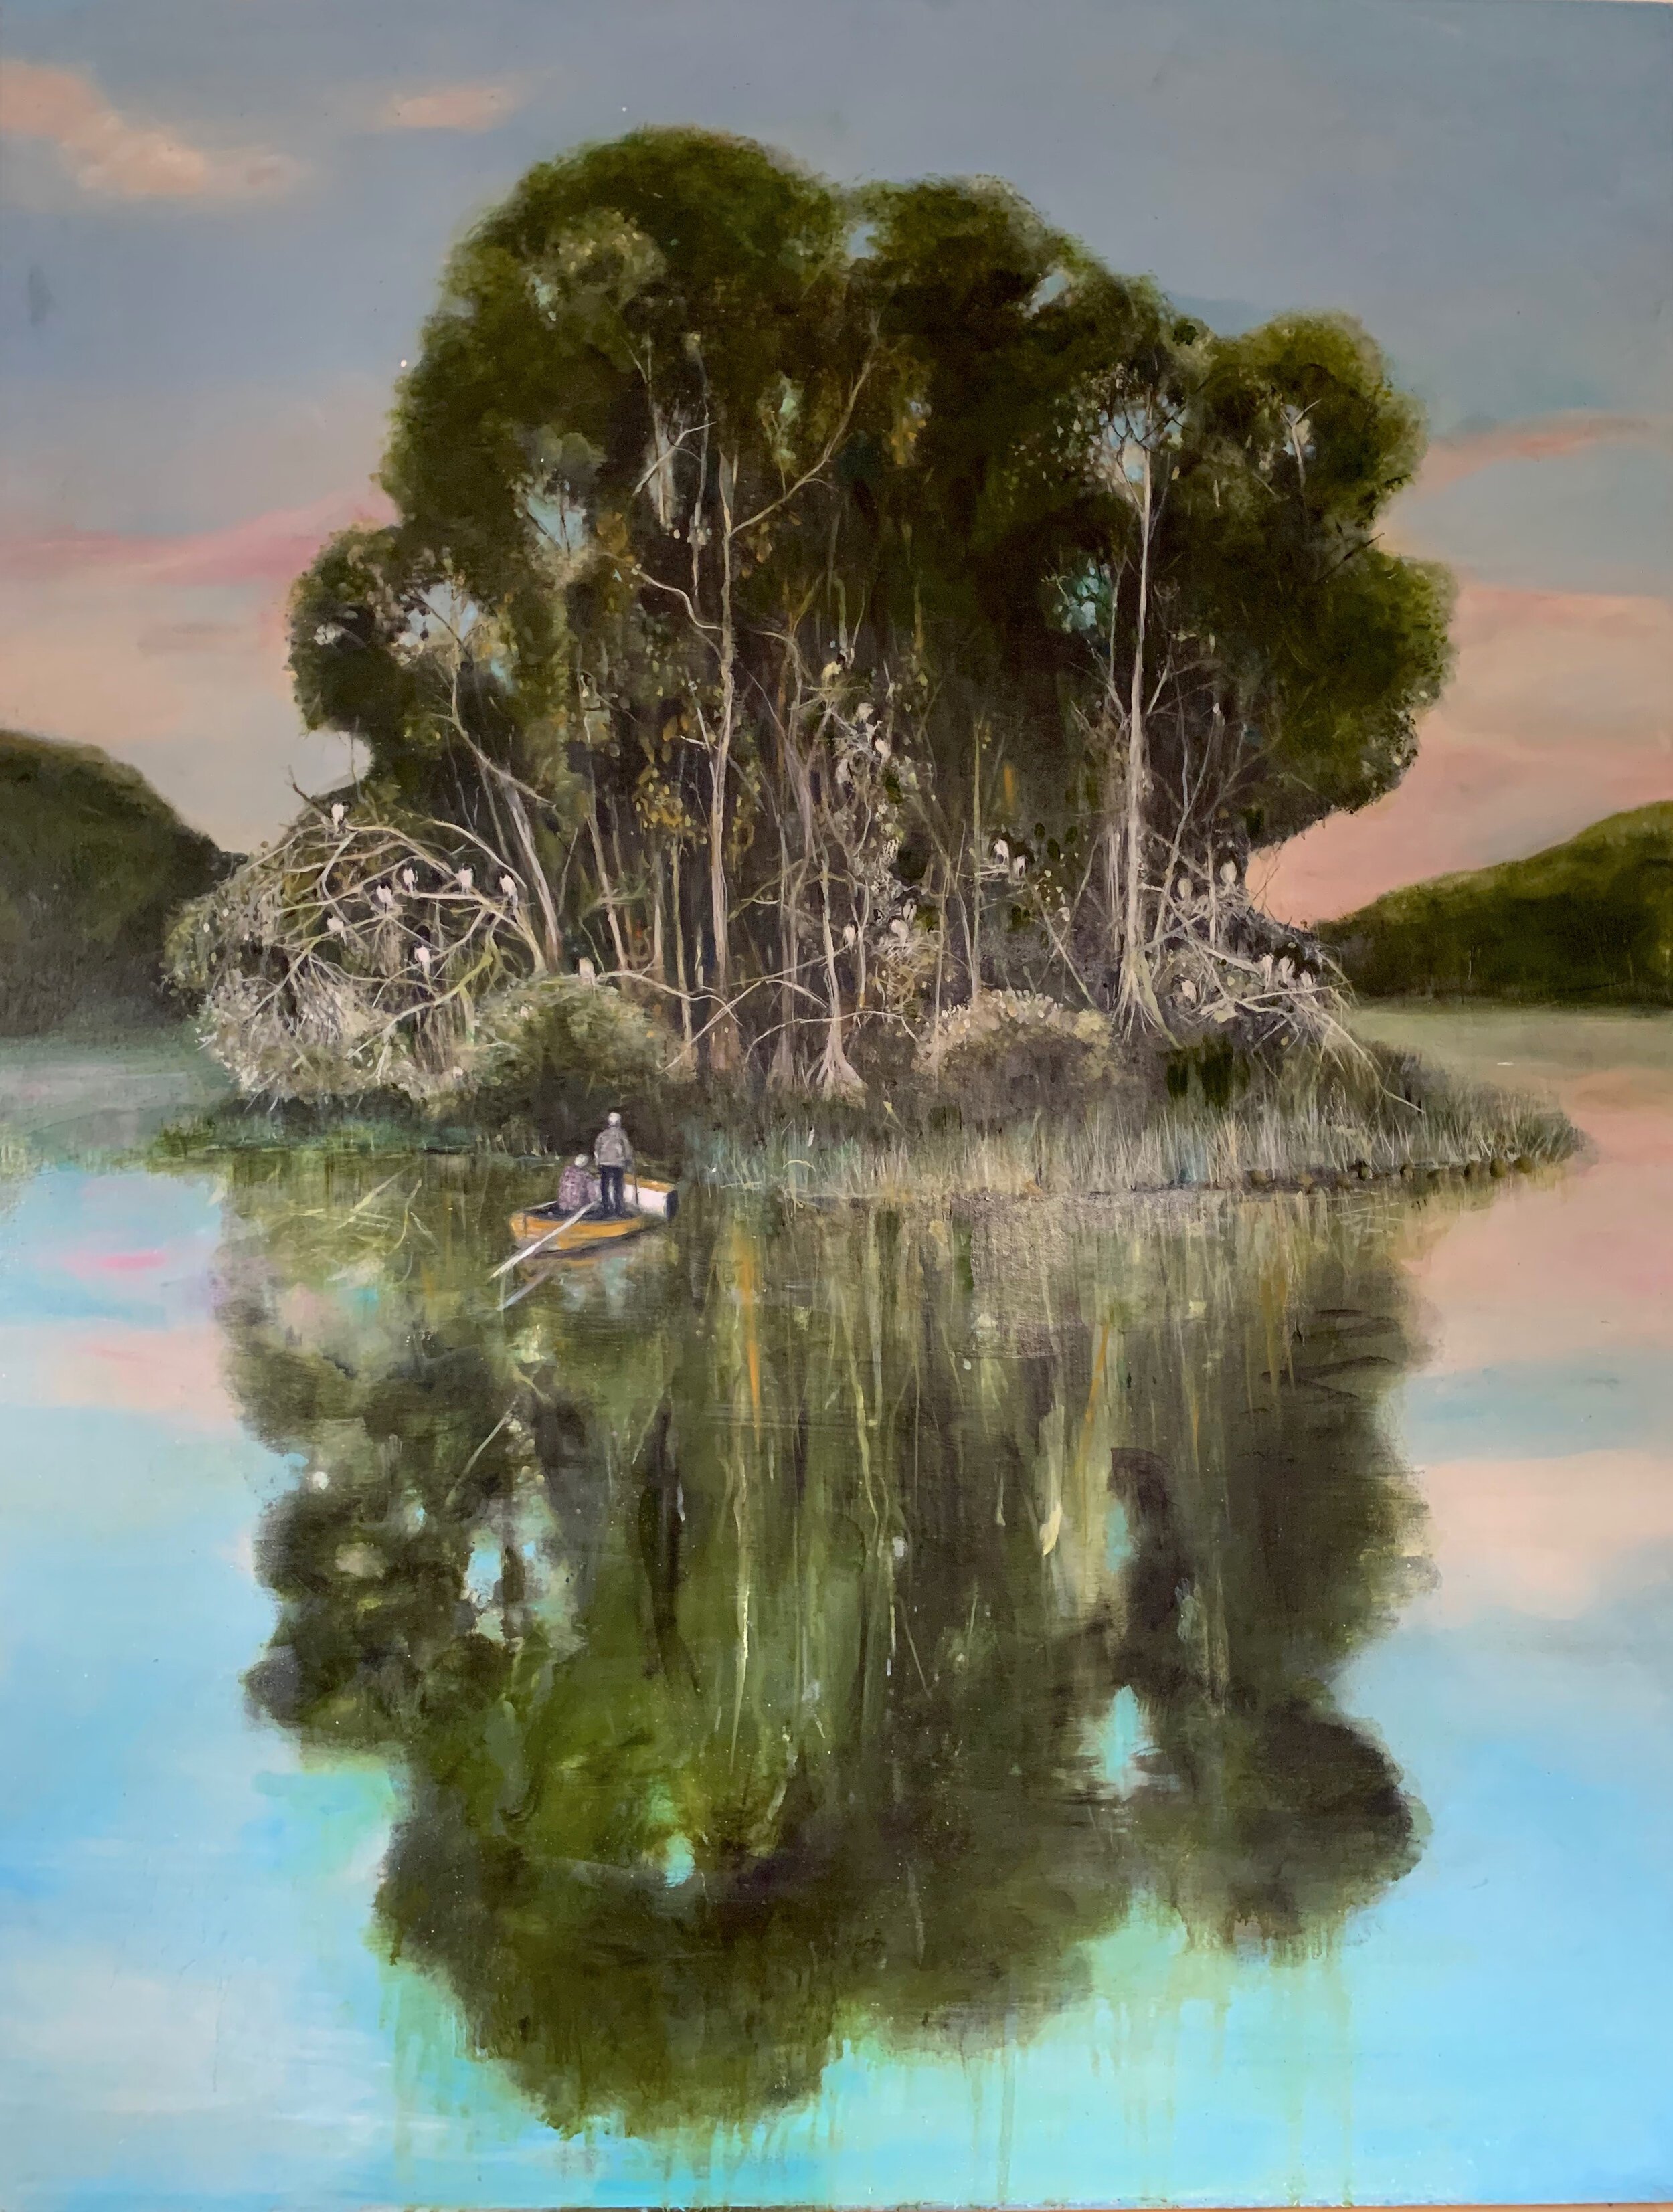 The Isle of Ibis: 2020 Oil on canvas on board, 100 x 85 cm